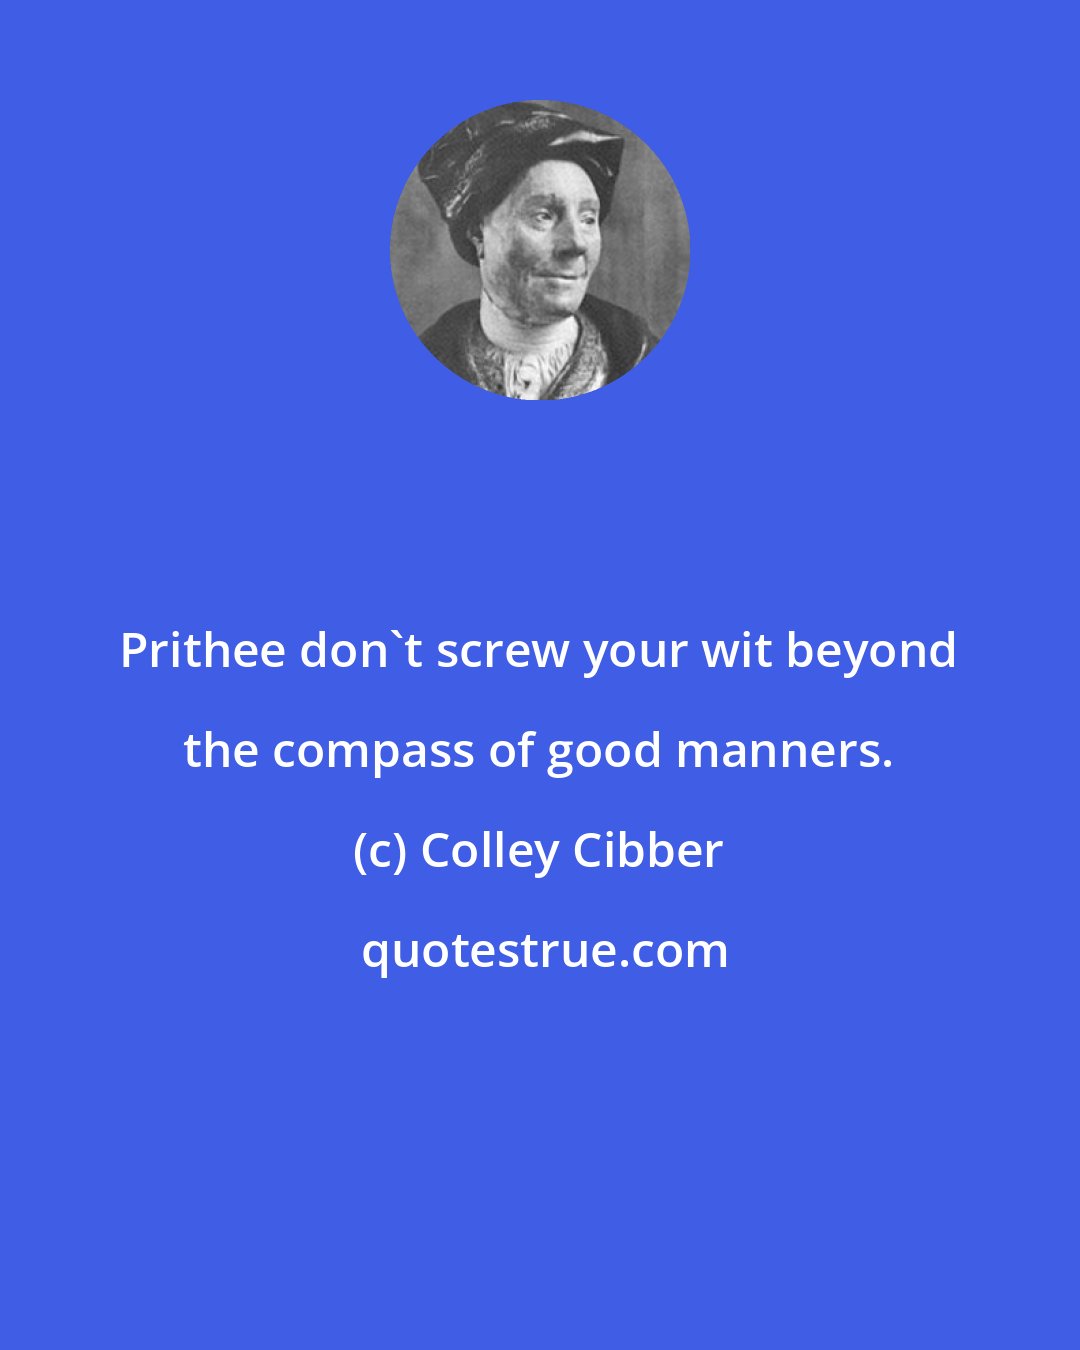 Colley Cibber: Prithee don't screw your wit beyond the compass of good manners.